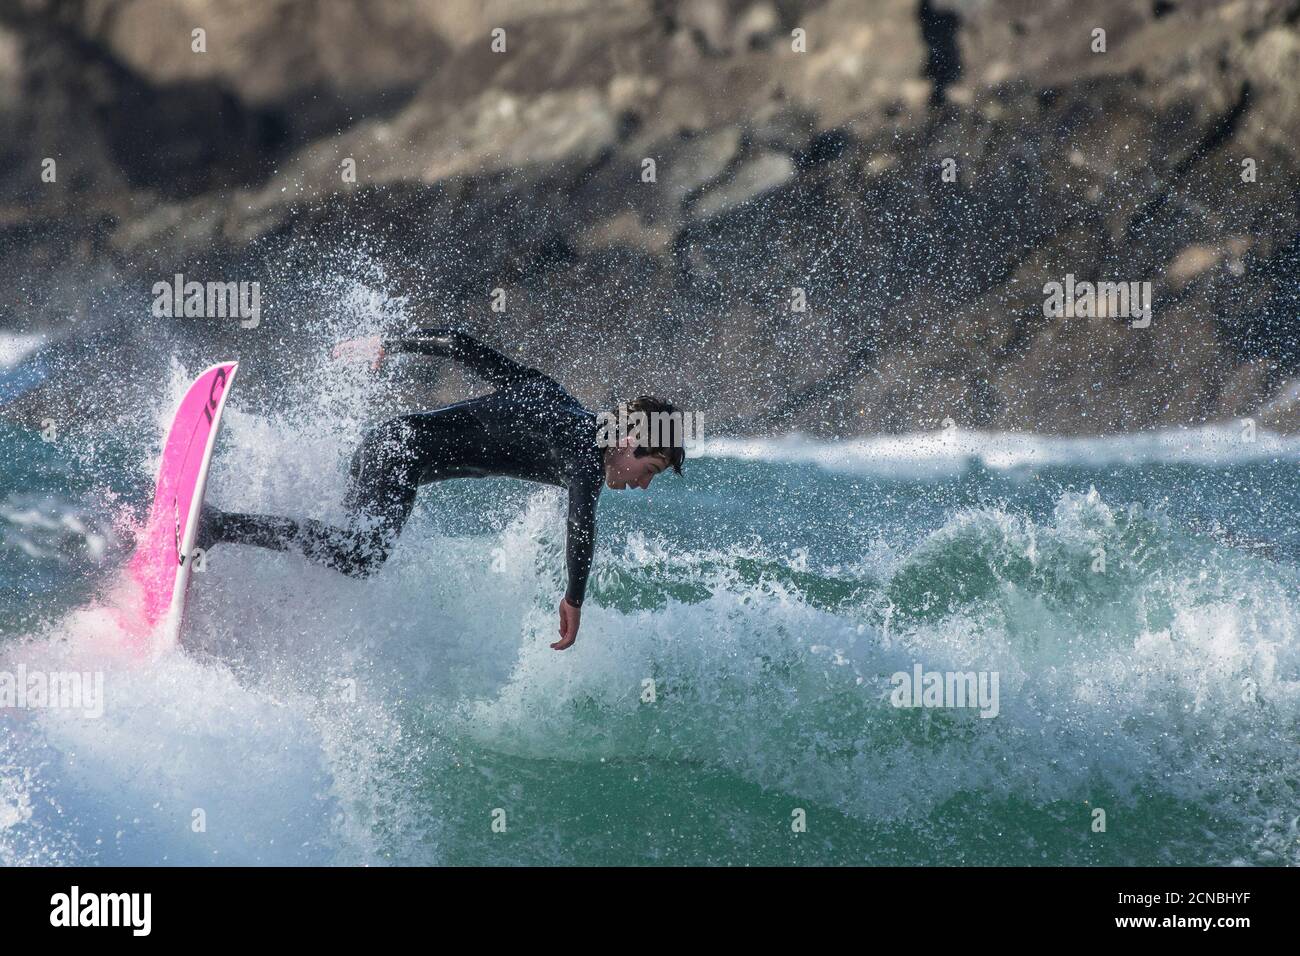 Spectacular surfing action at Fistral in Newquay in Cornwall. Stock Photo